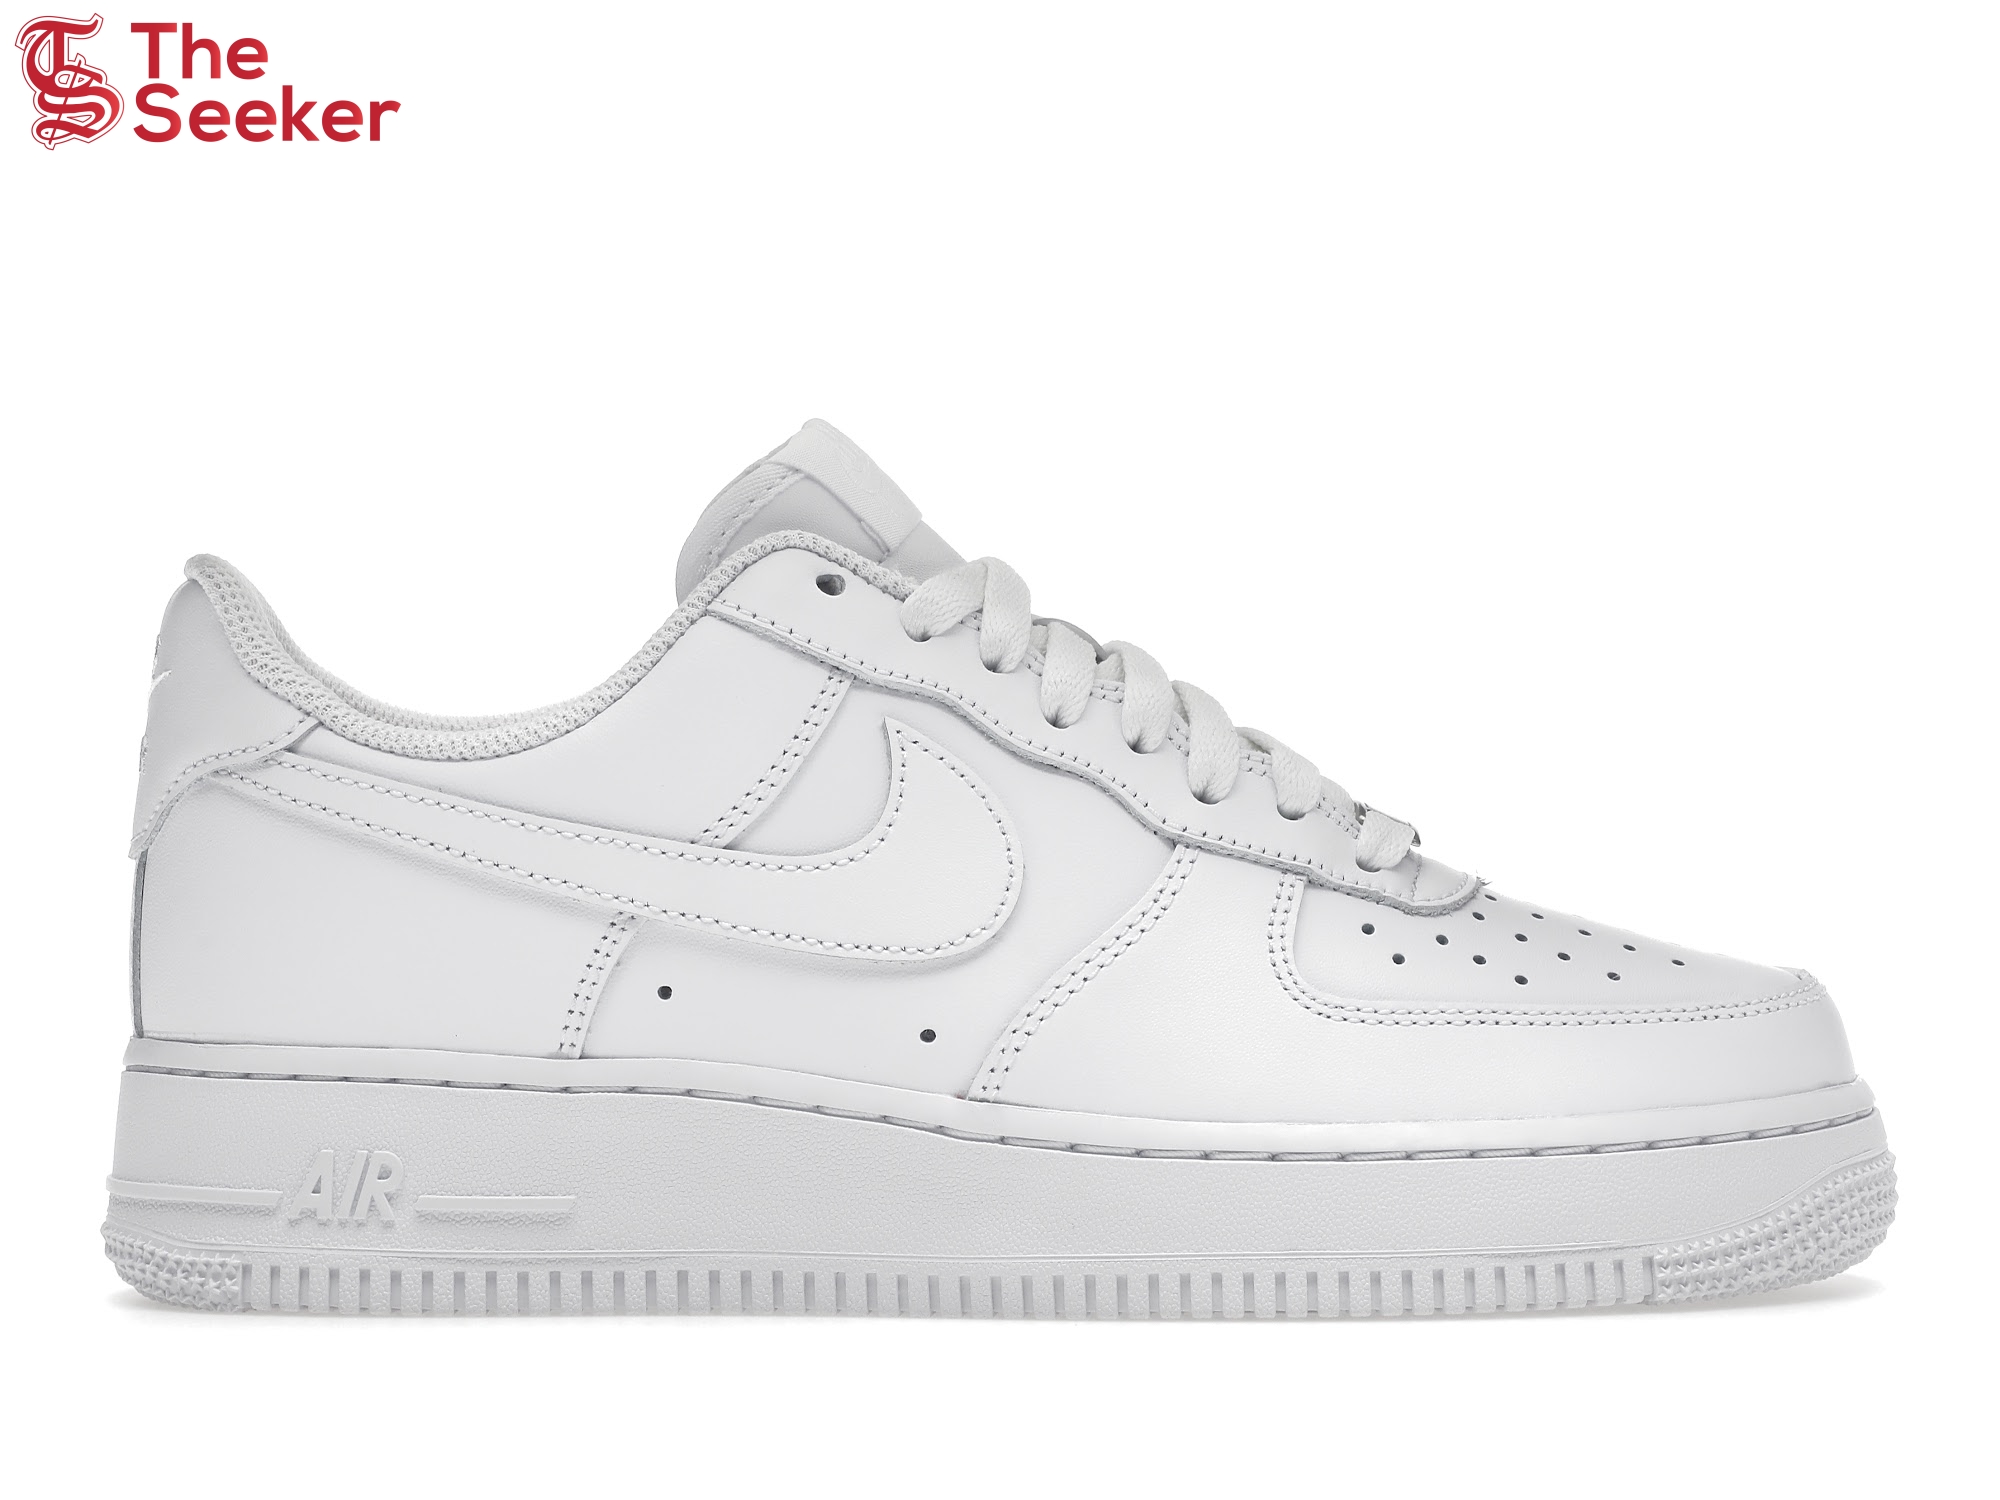 Nike Air Force 1 Low '07 White (Women's)